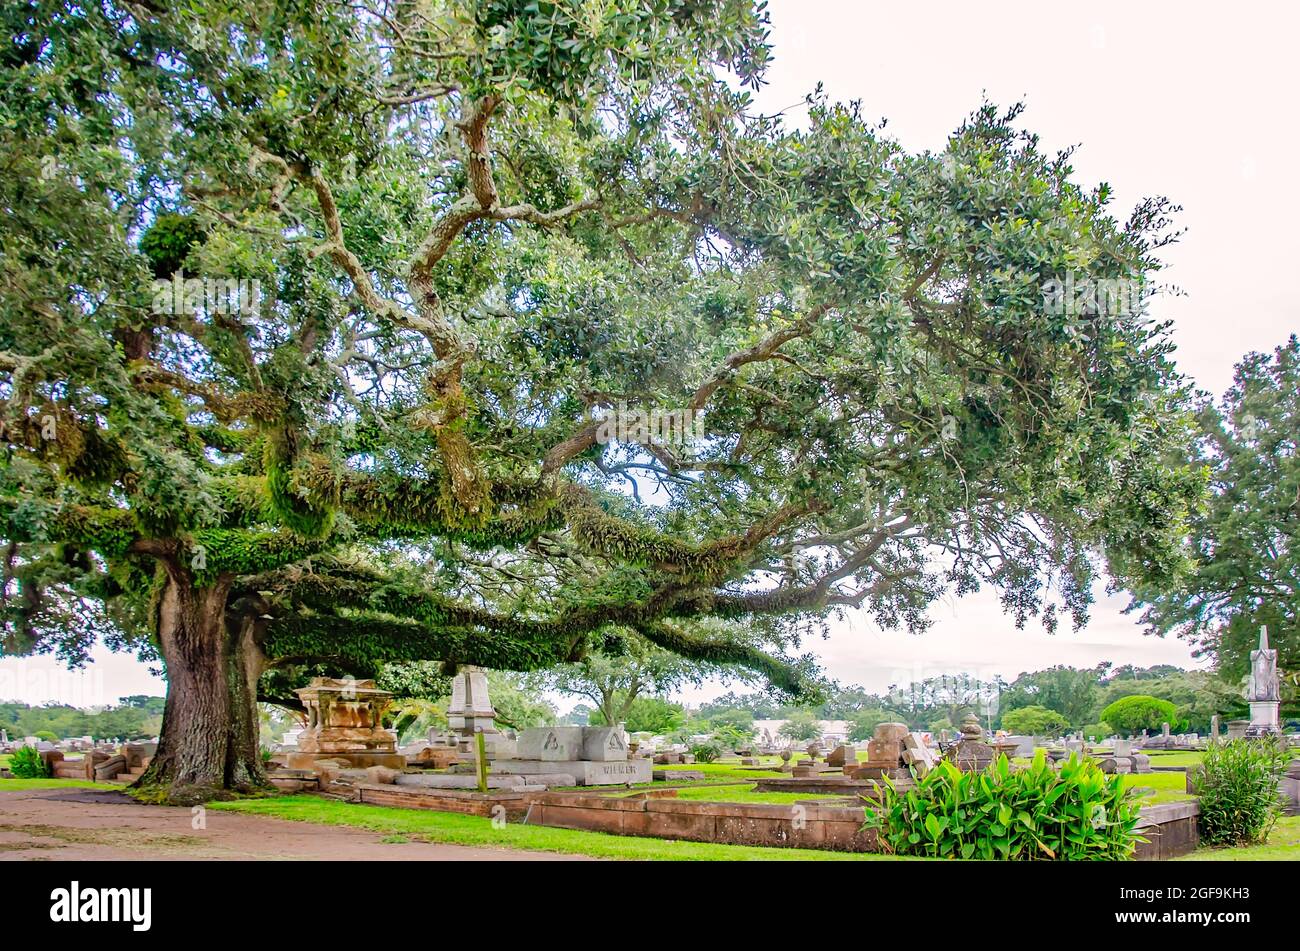 Magnolia Cemetery features ornate graves surrounded by centuries-old Southern live oak trees, Aug. 14, 2021, in Mobile, Alabama. Stock Photo